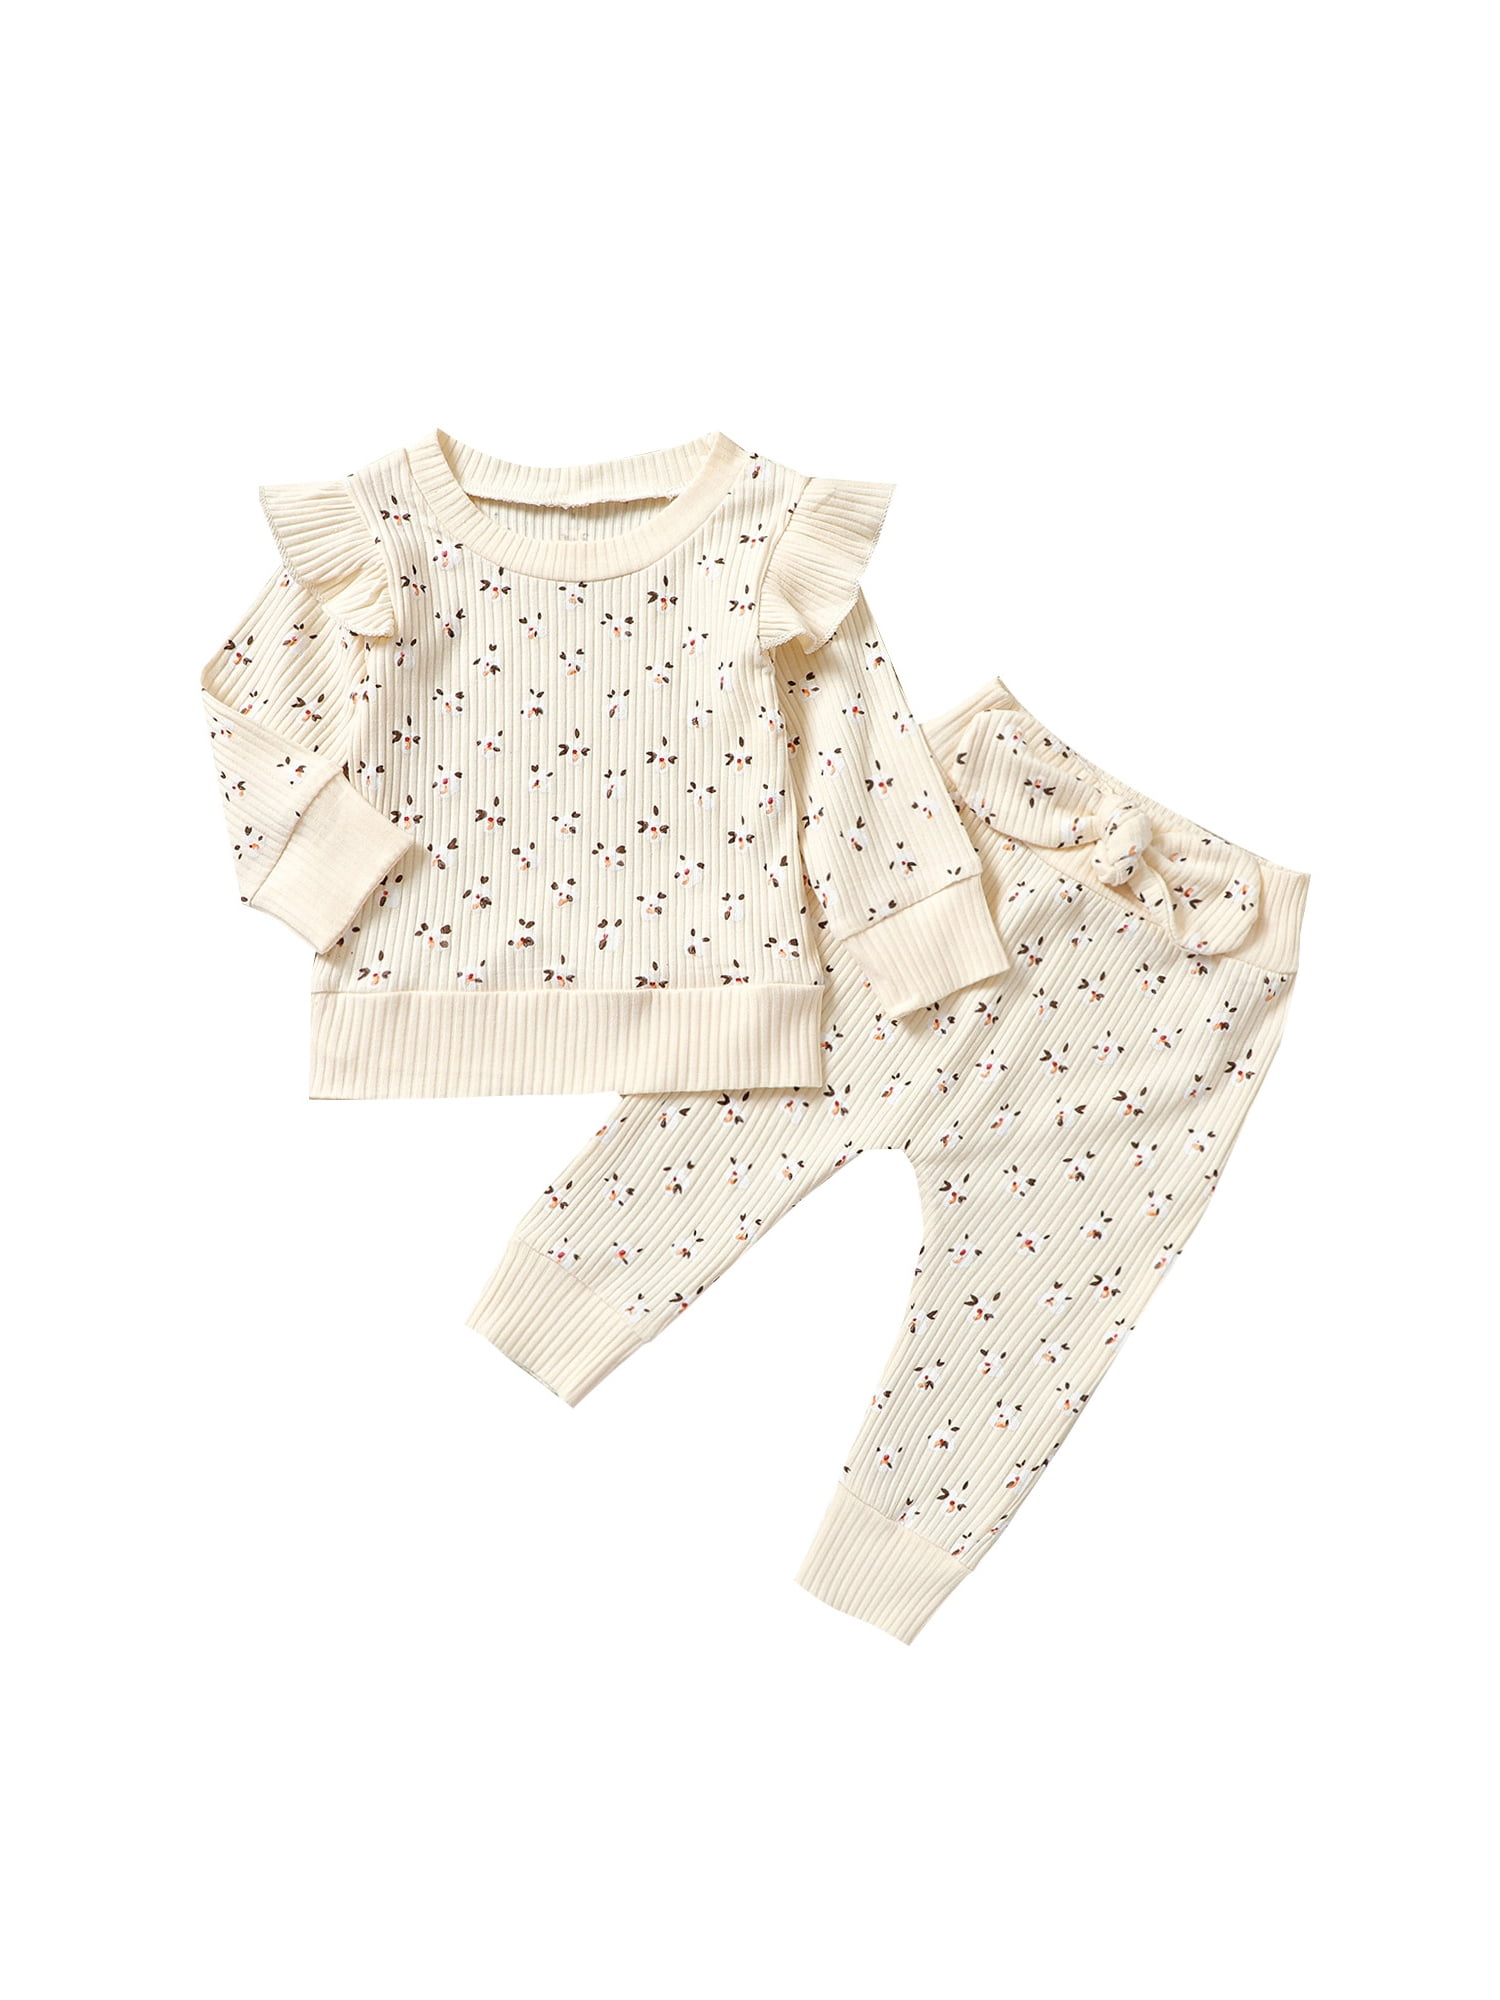 Outfits for Toddler Girls Clothes Set Floral Braces Chest Wrap Tops and Bowknot Long Pants 